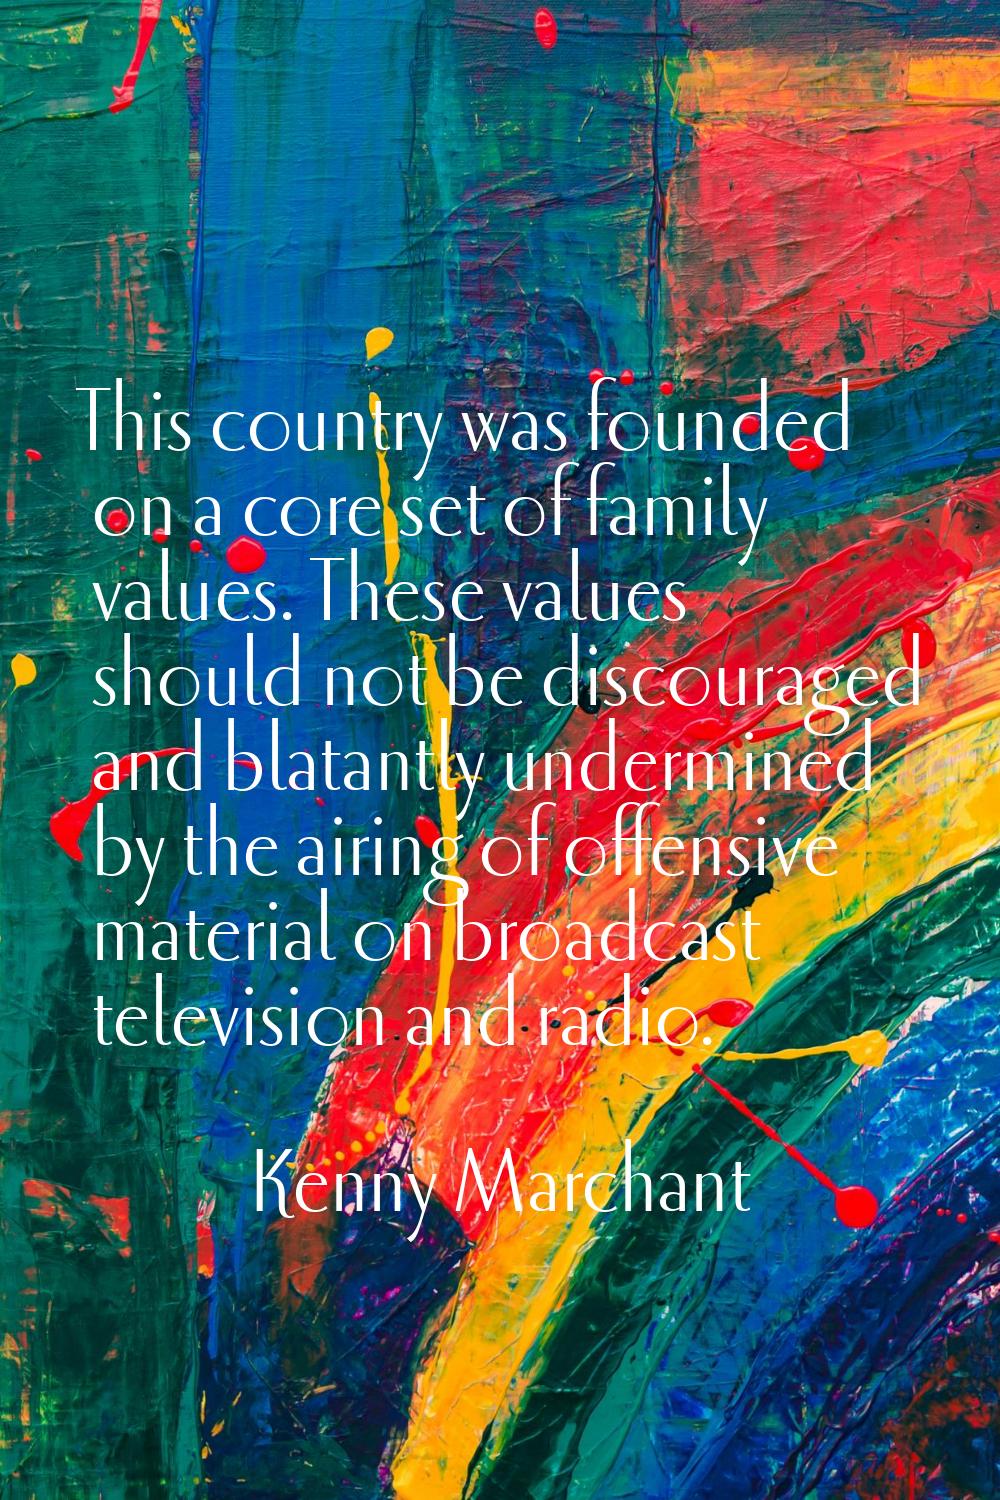 This country was founded on a core set of family values. These values should not be discouraged and